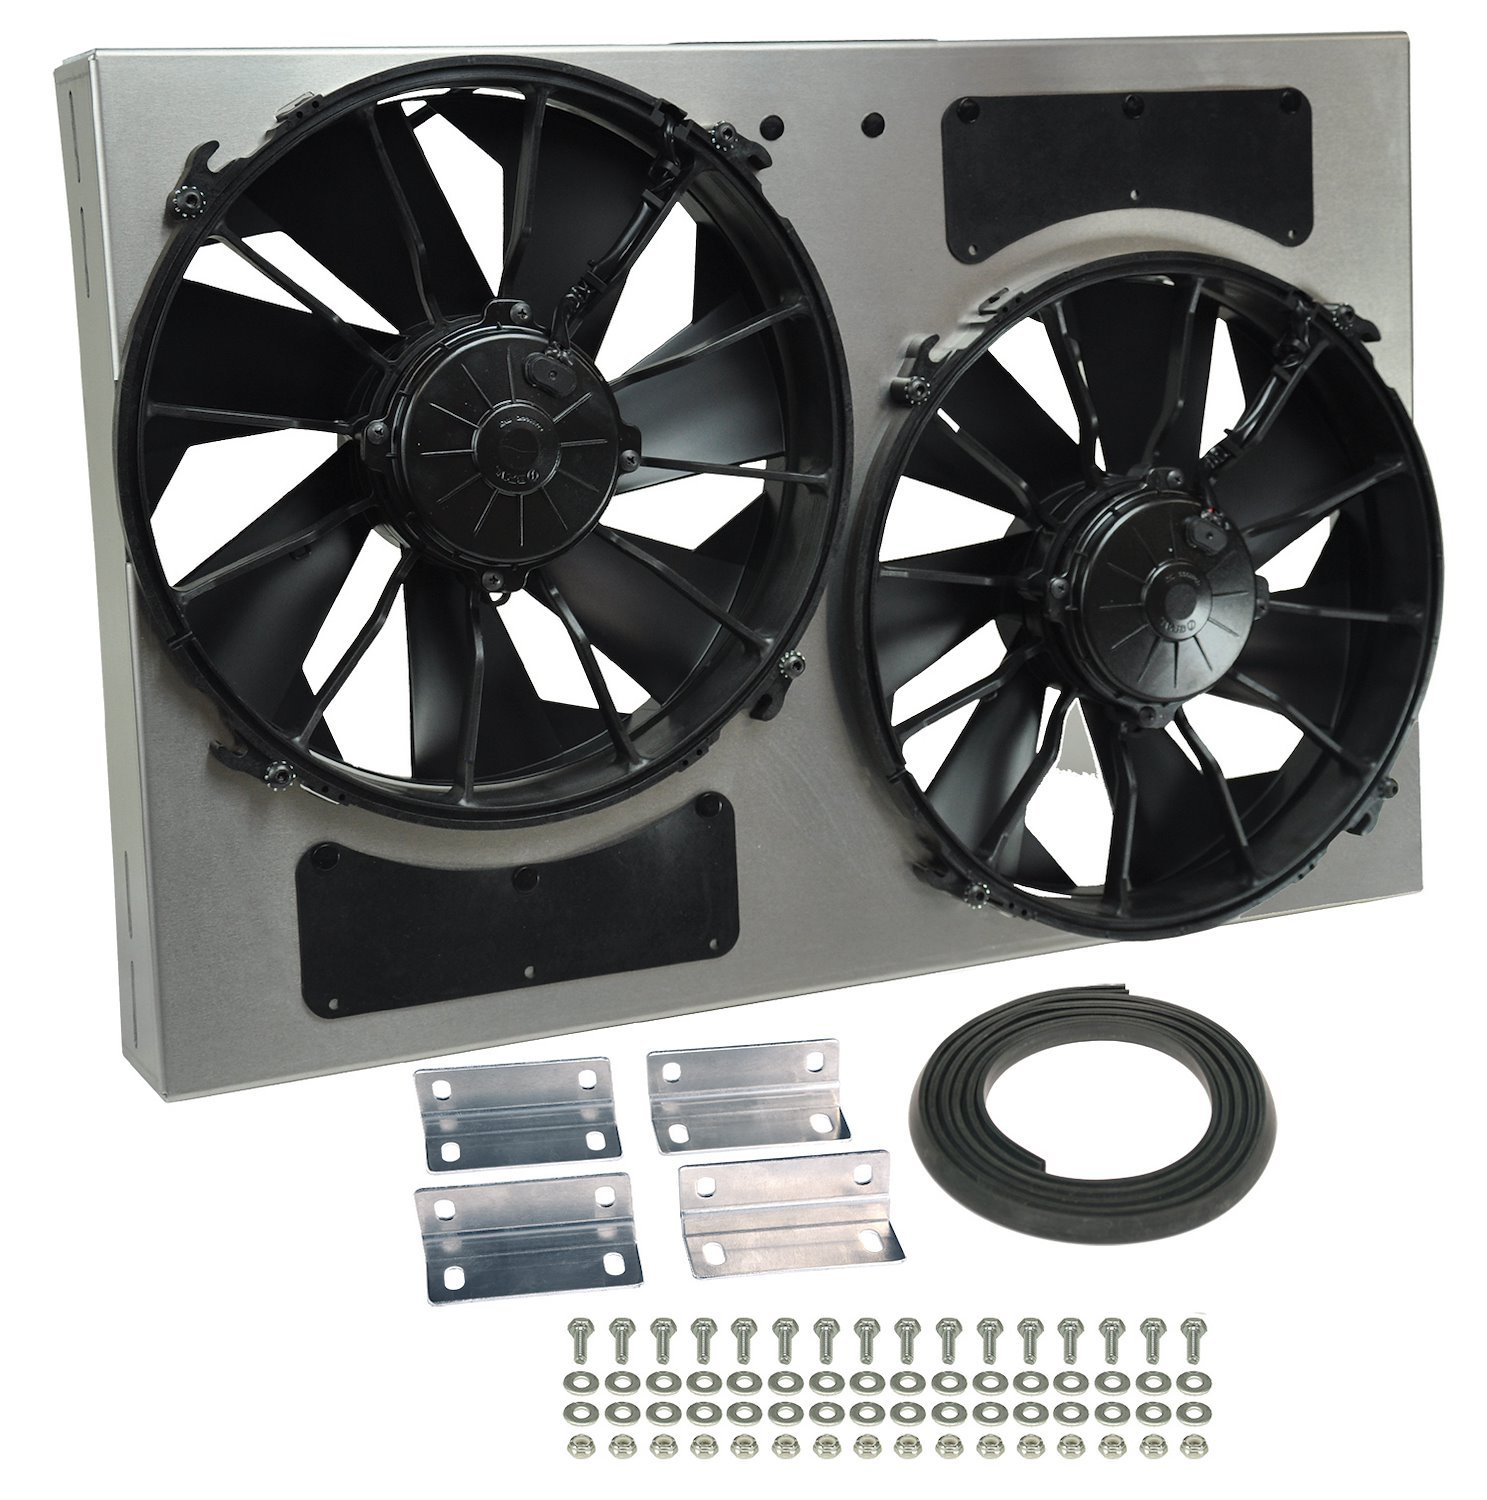 16826 High-Output Dual Fan Assembly CFM: 4000